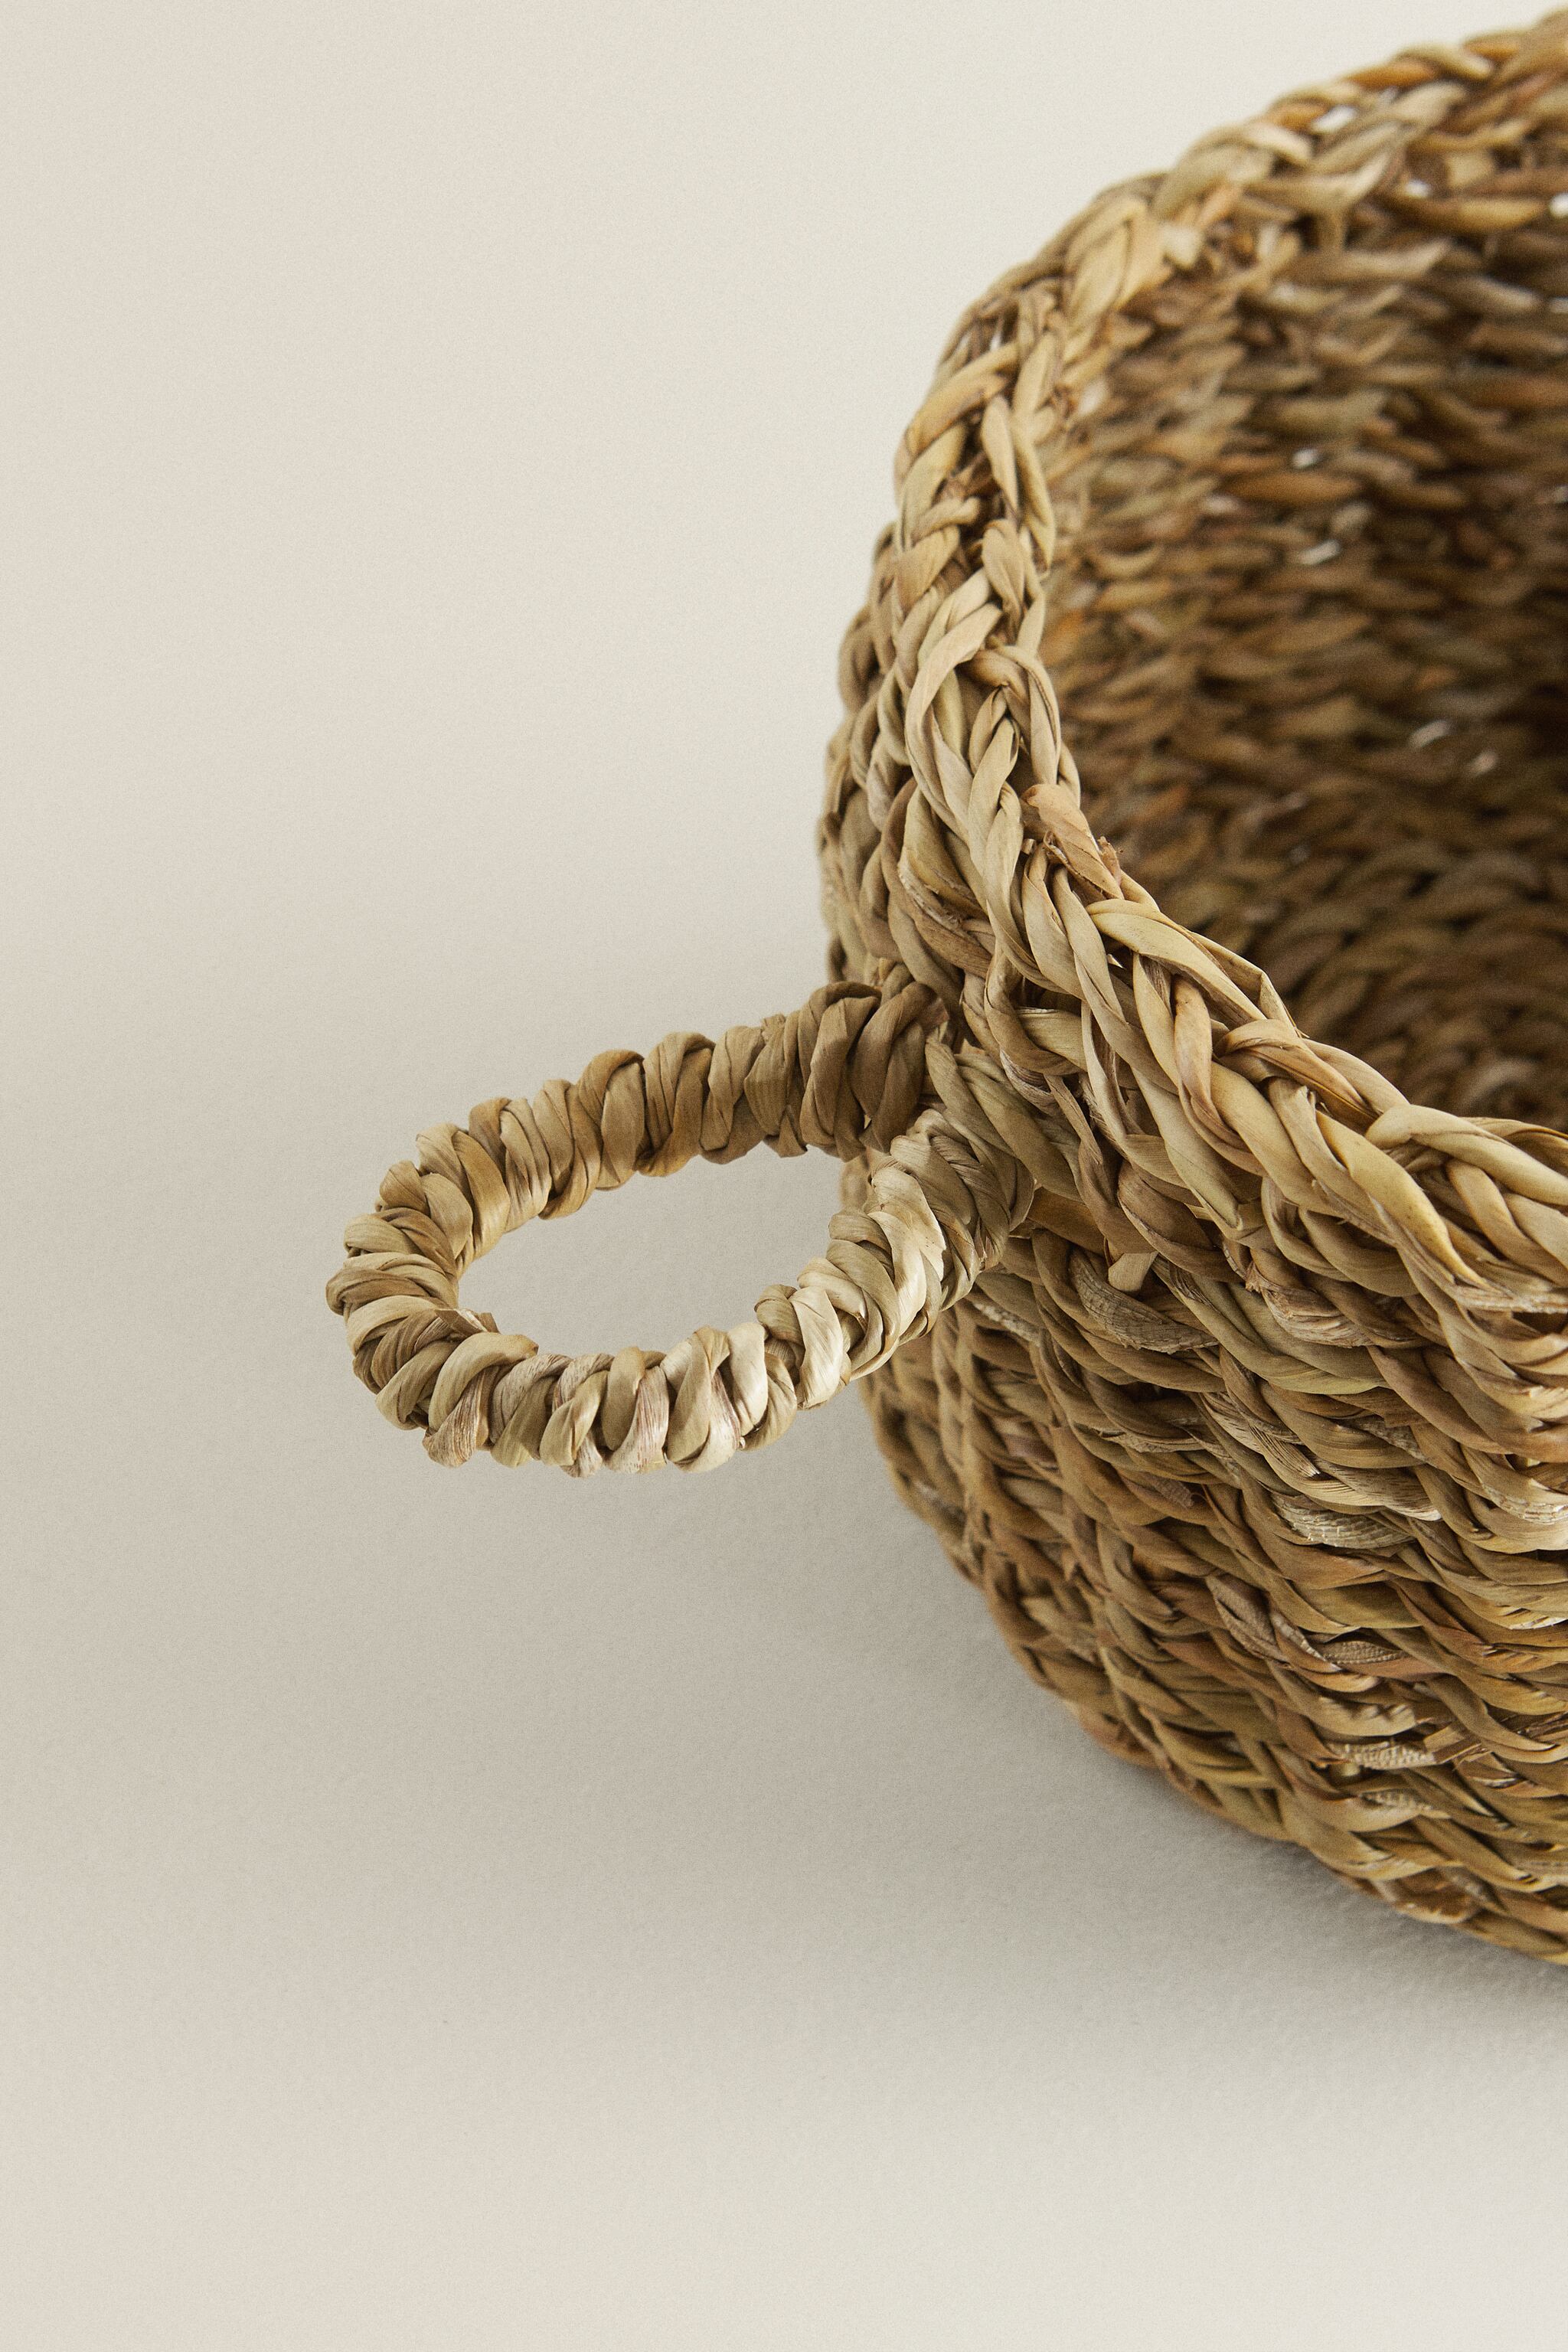 ROUND BASKET WITH HANDLE